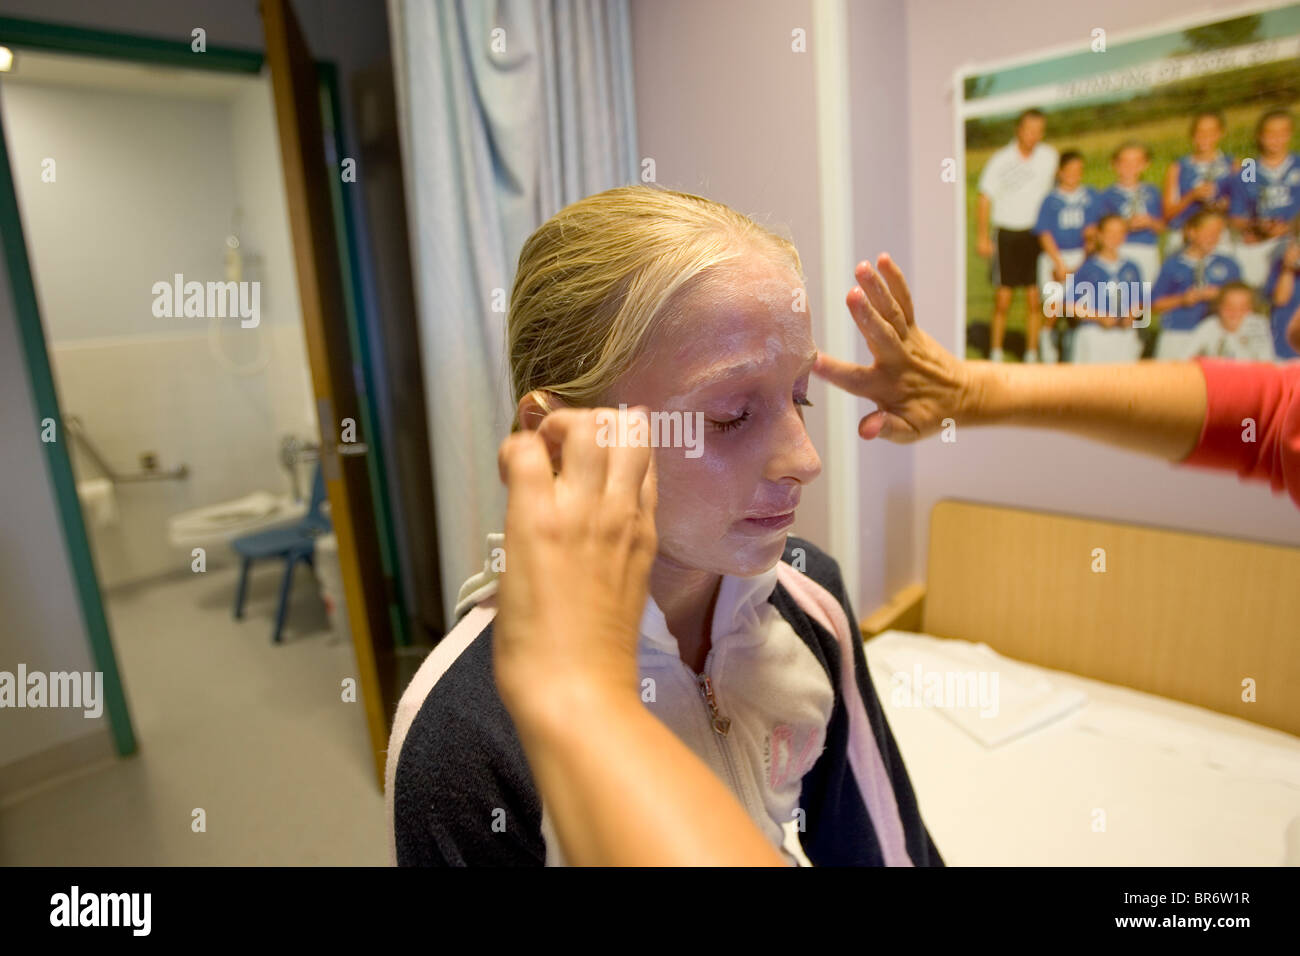 Gilrs with severe skin allergy receives treatment in hospital Stock Photo